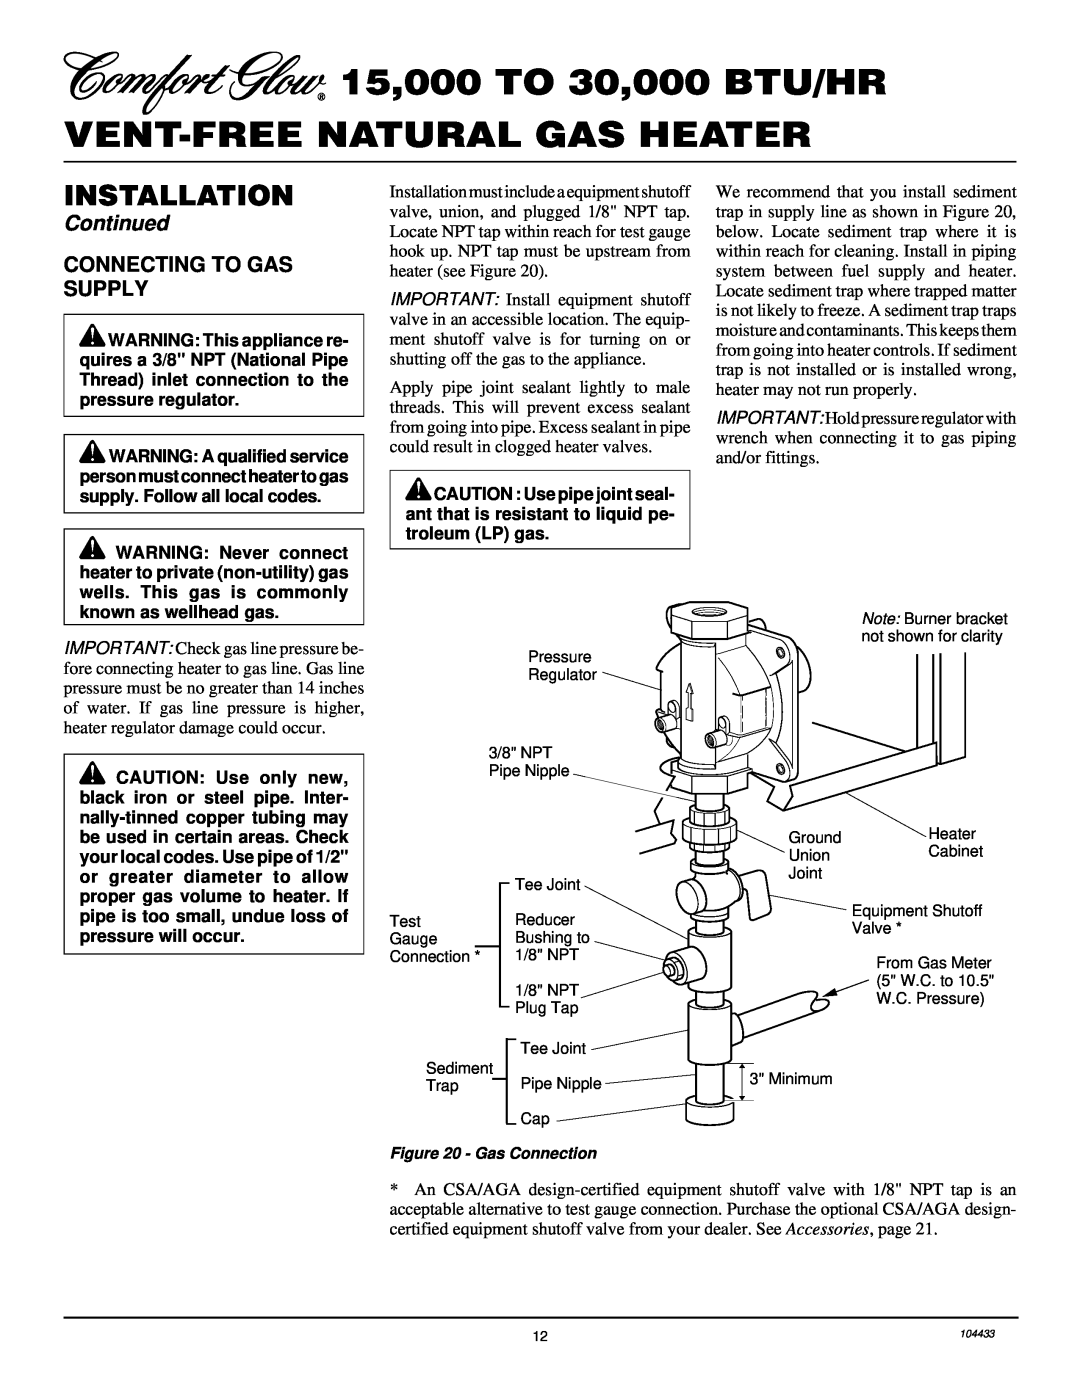 Desa RFN30T installation manual Connecting To Gas Supply, Installation, Continued, Gas Connection 